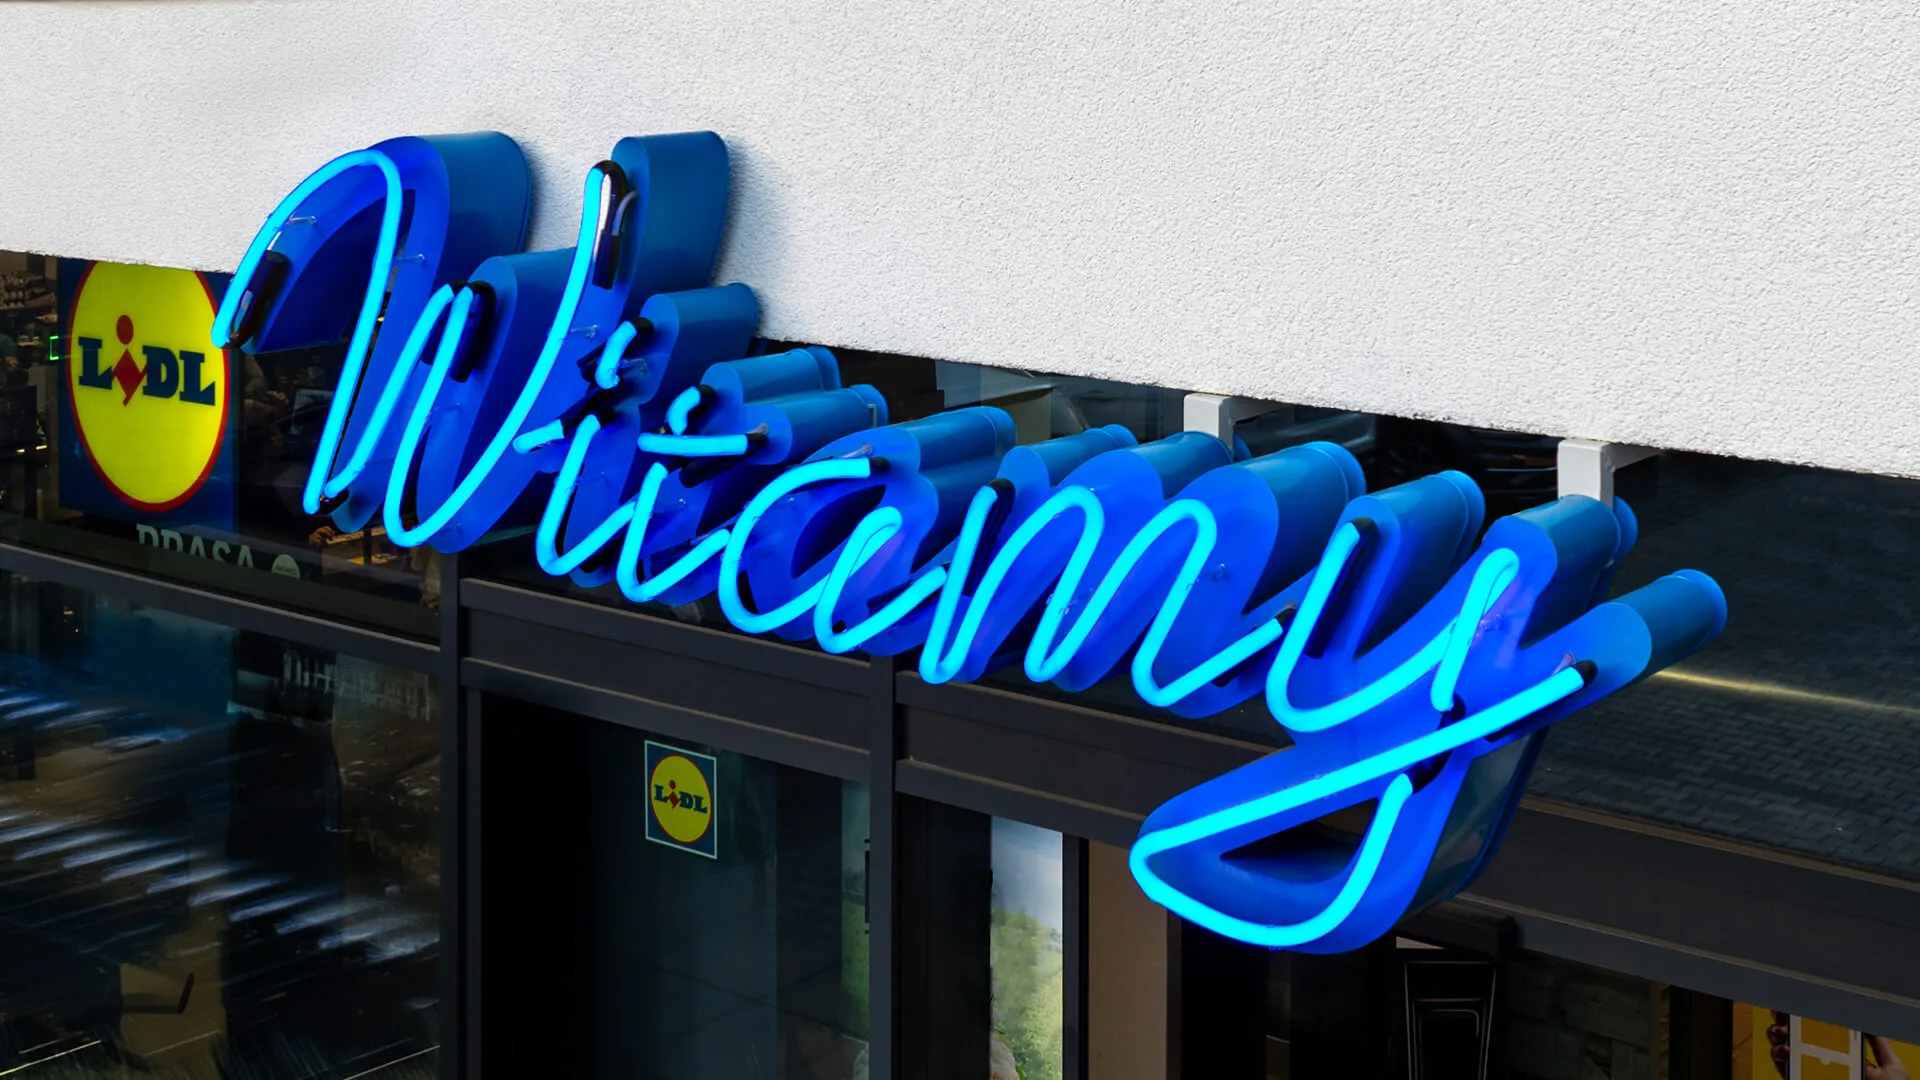 Neon sign "Welcome" Lidl - Pretende Warsaw